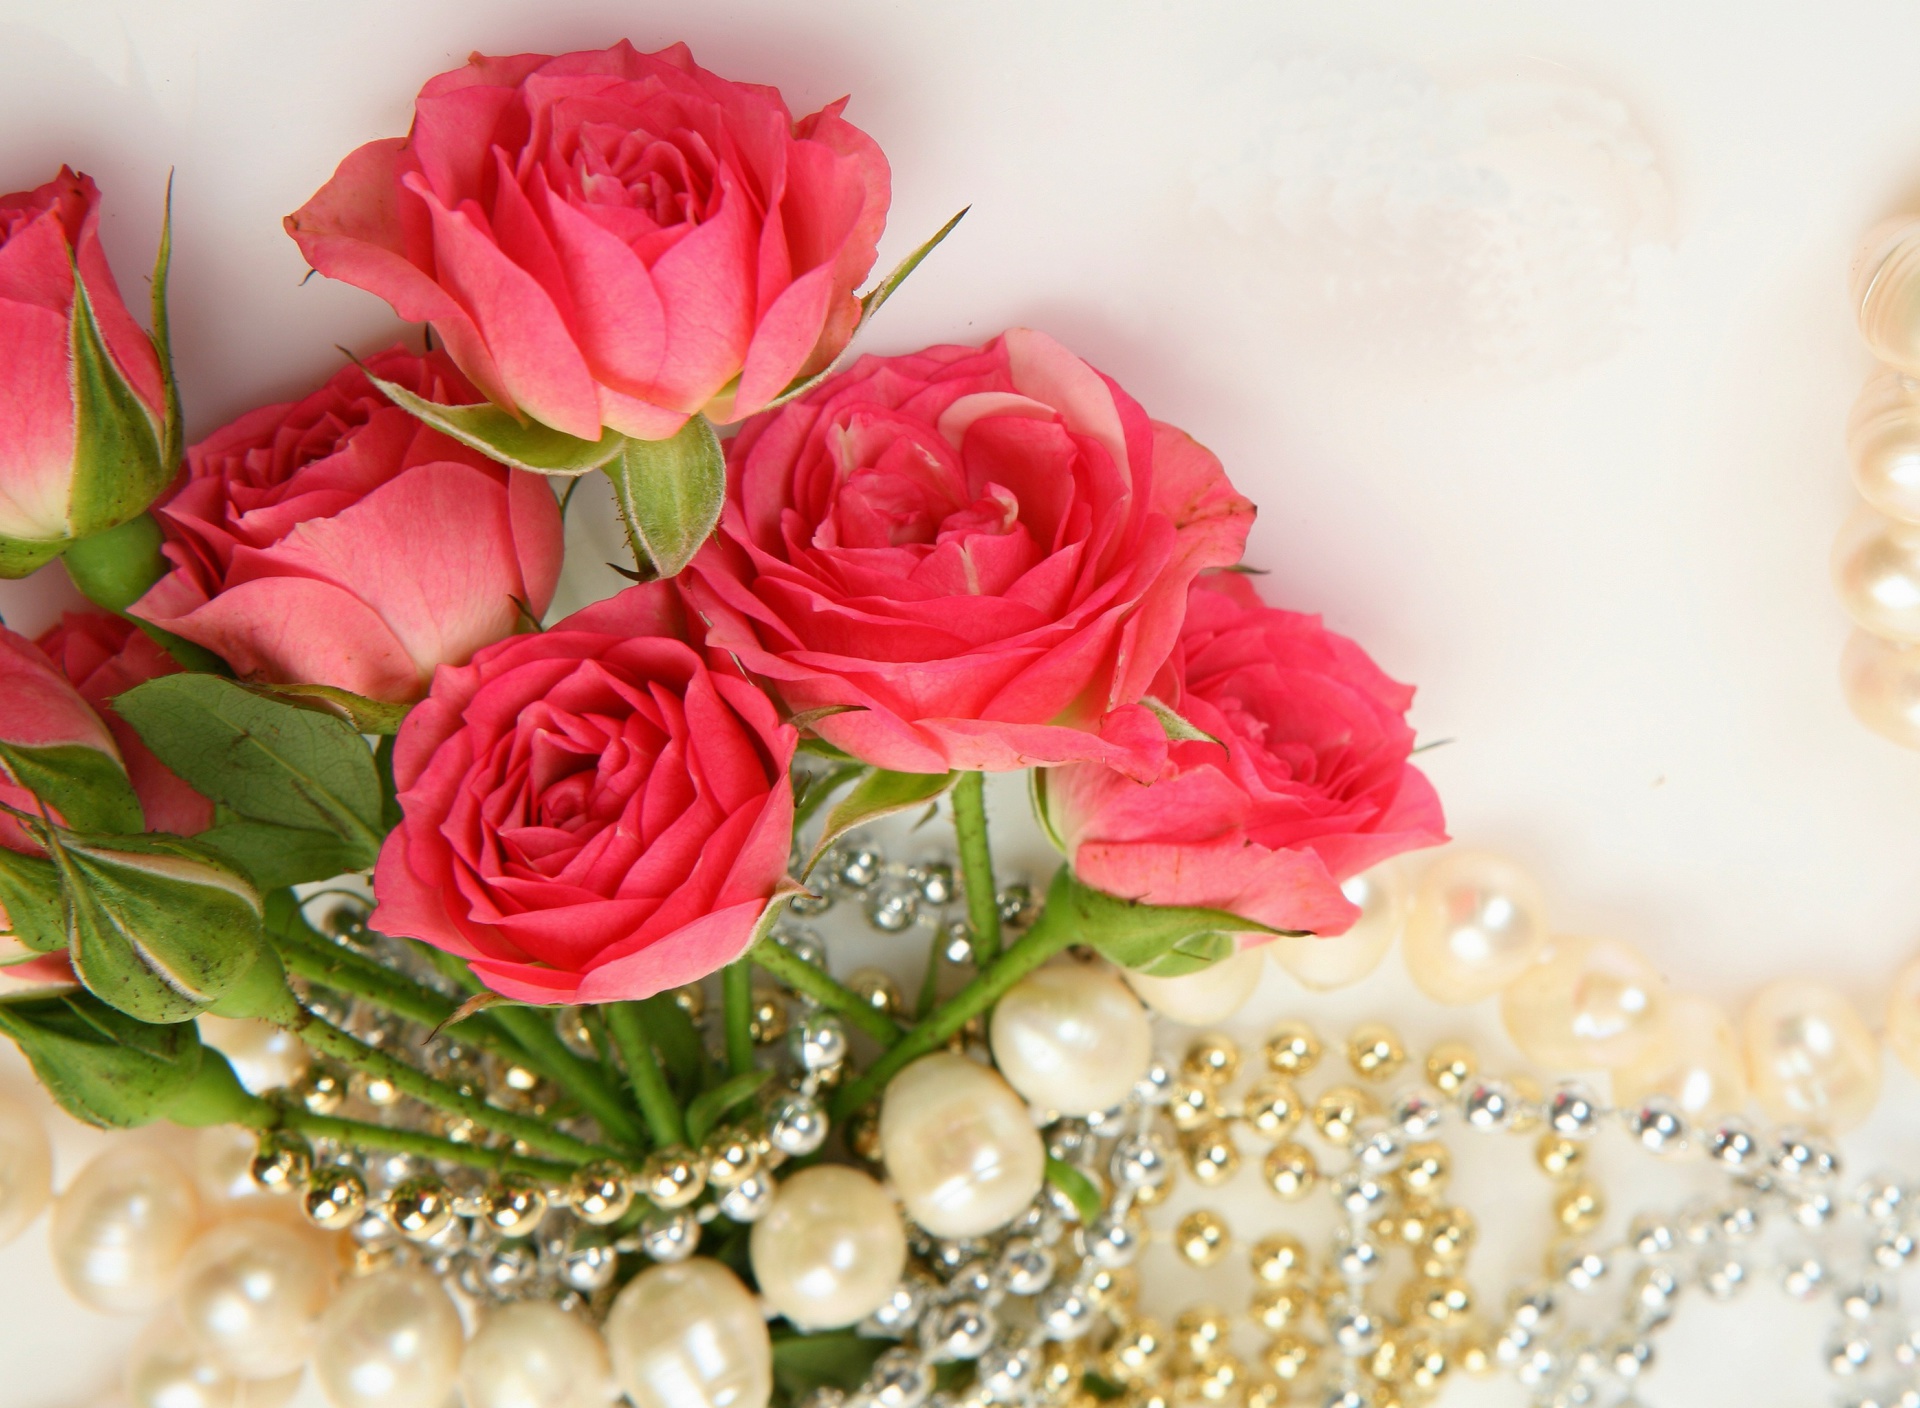 Das Necklace and Roses Bouquet Wallpaper 1920x1408